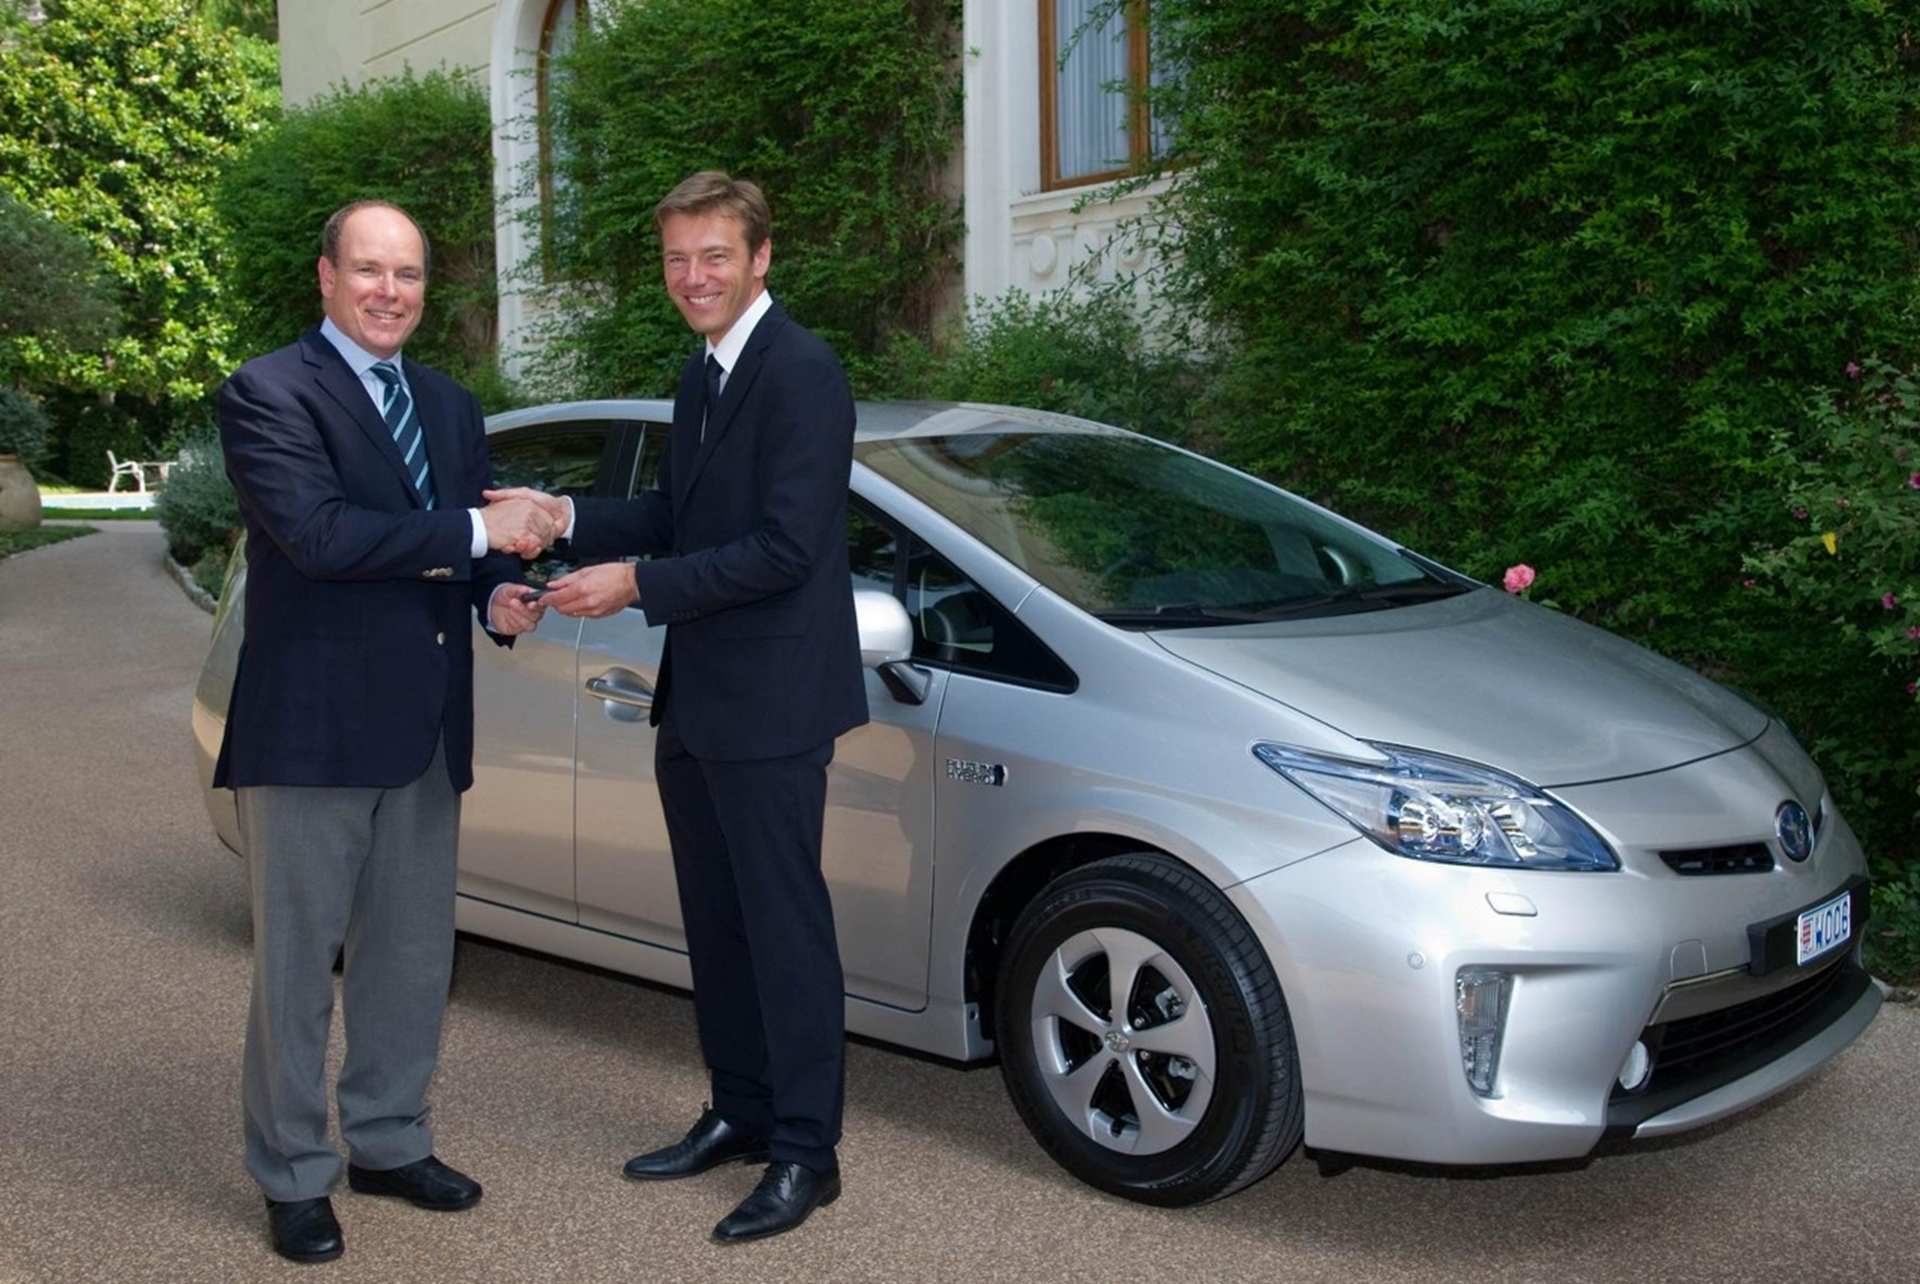 EUROPE’S FIRST PRODUCTION PRIUS PLUG-IN HYBRID DELIVERED TO H.S.H. PRINCE ALBERT II OF MONACO